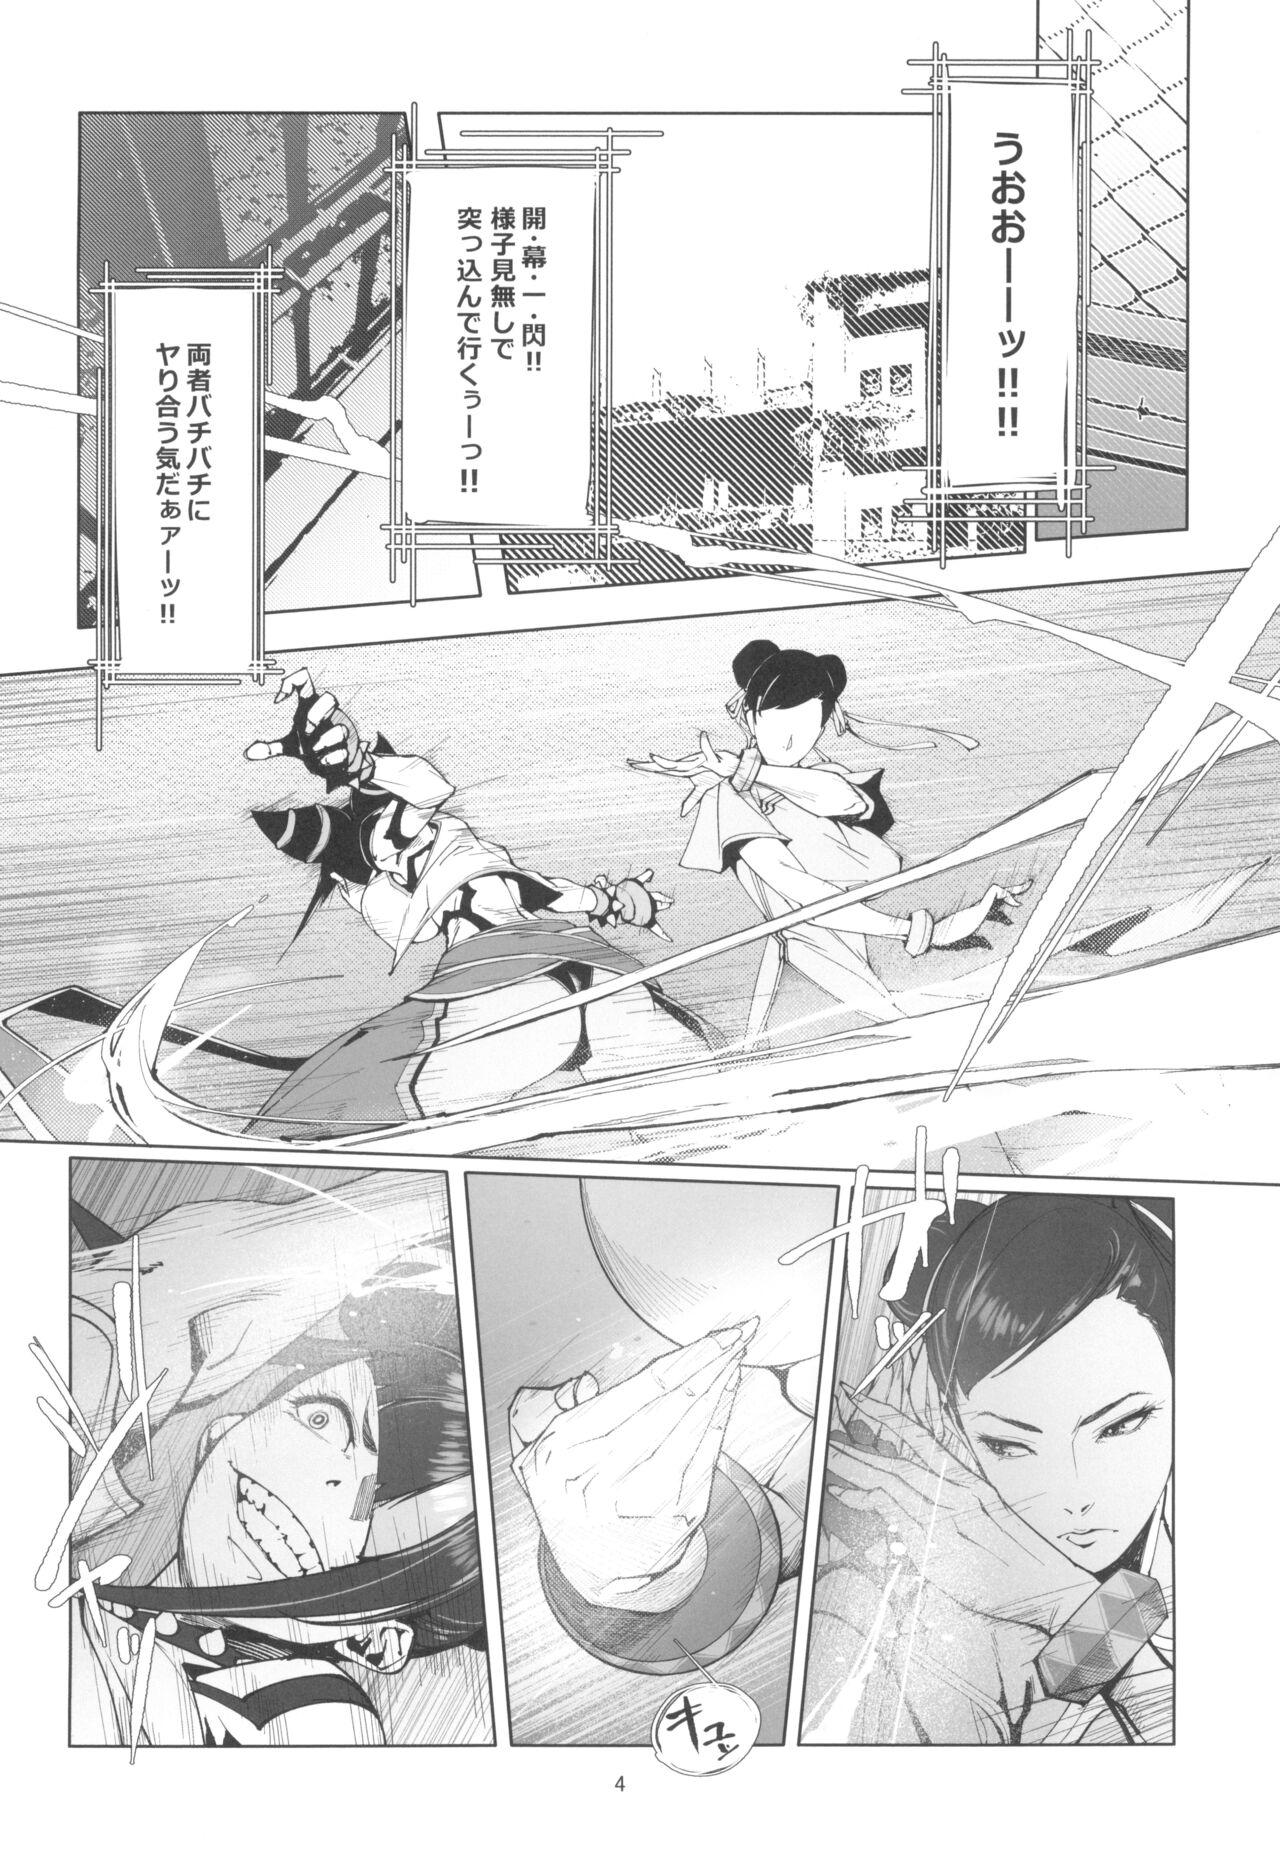 Moaning Backstab - Street fighter Mediumtits - Page 4